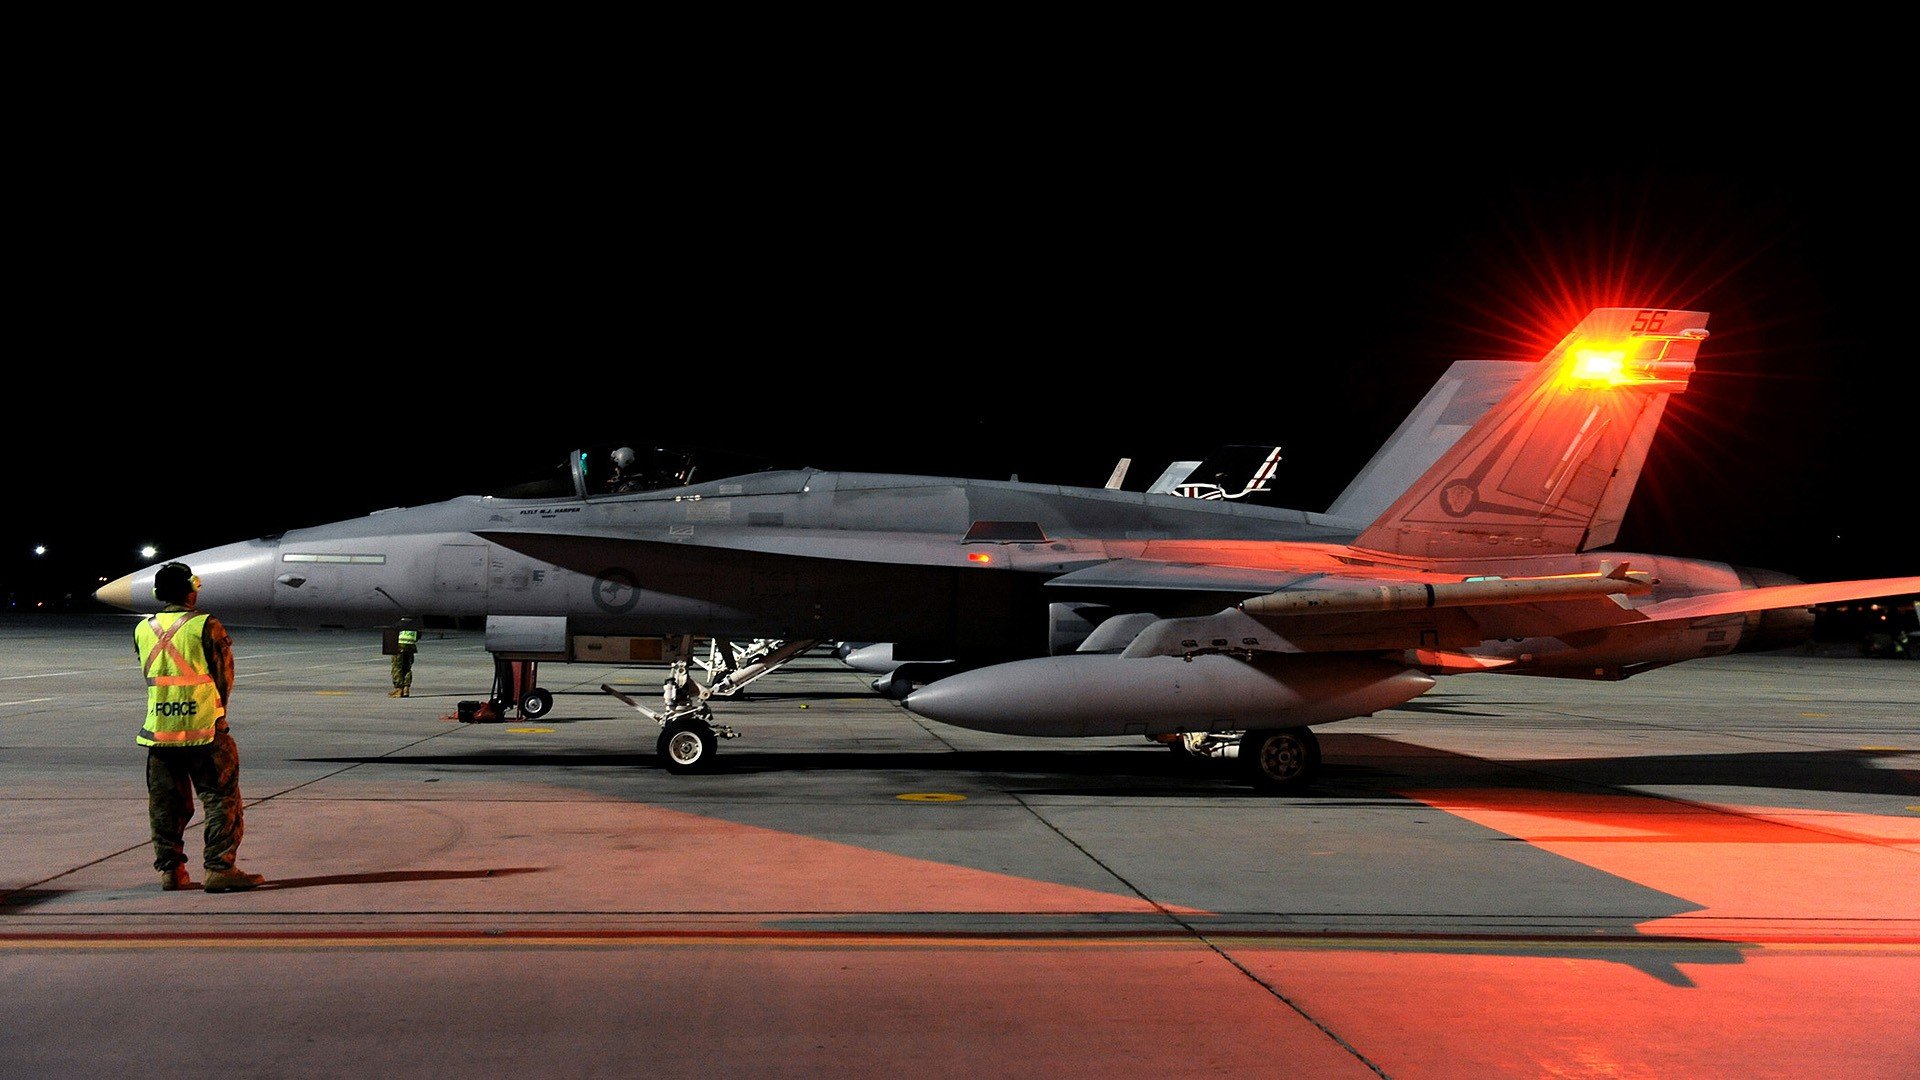 night, Airplanes, Bomber, Fa 18, Hornet, Jet, Aircraft Wallpaper